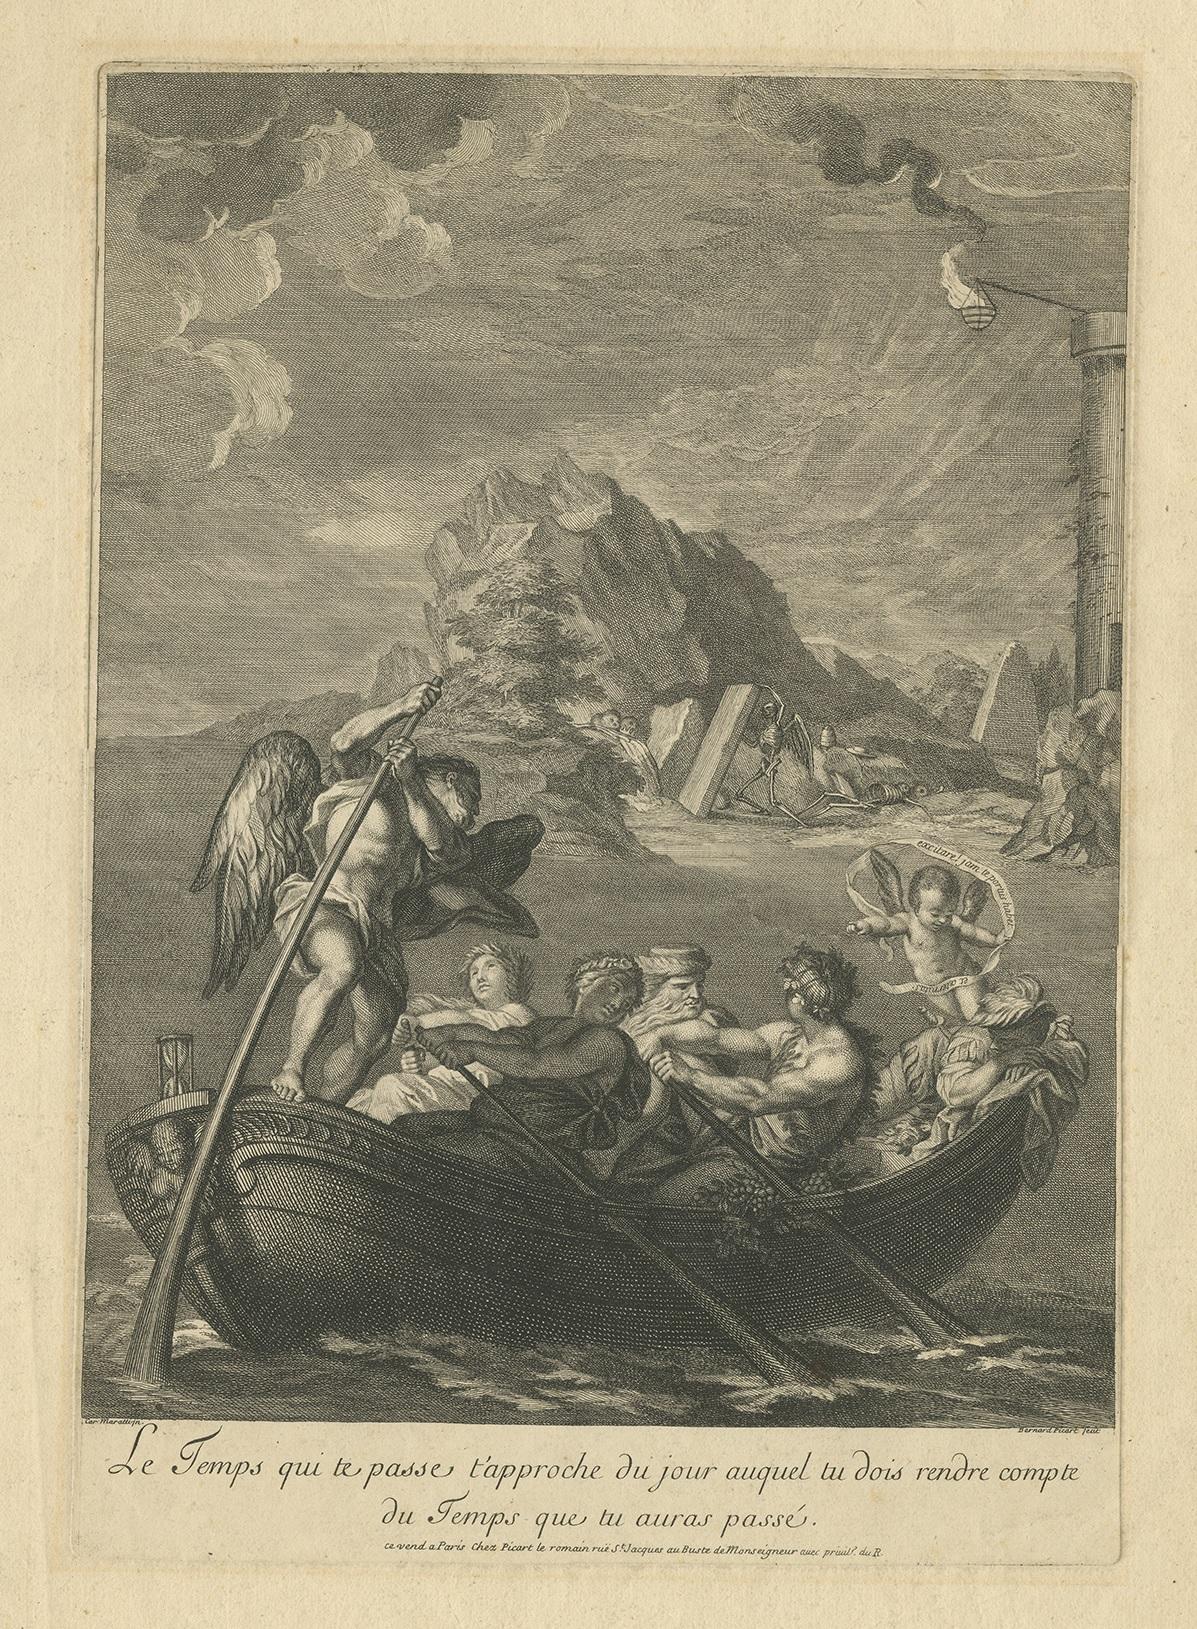 Antique print titled 'Le Temps qui te passe t'approche du jour auquel tu dois rendre compte du Temps que tu auras passé'. Copper engraving of the Allegory of Time. It shows a boat being rowed by men and women of all ages, being steered by Time